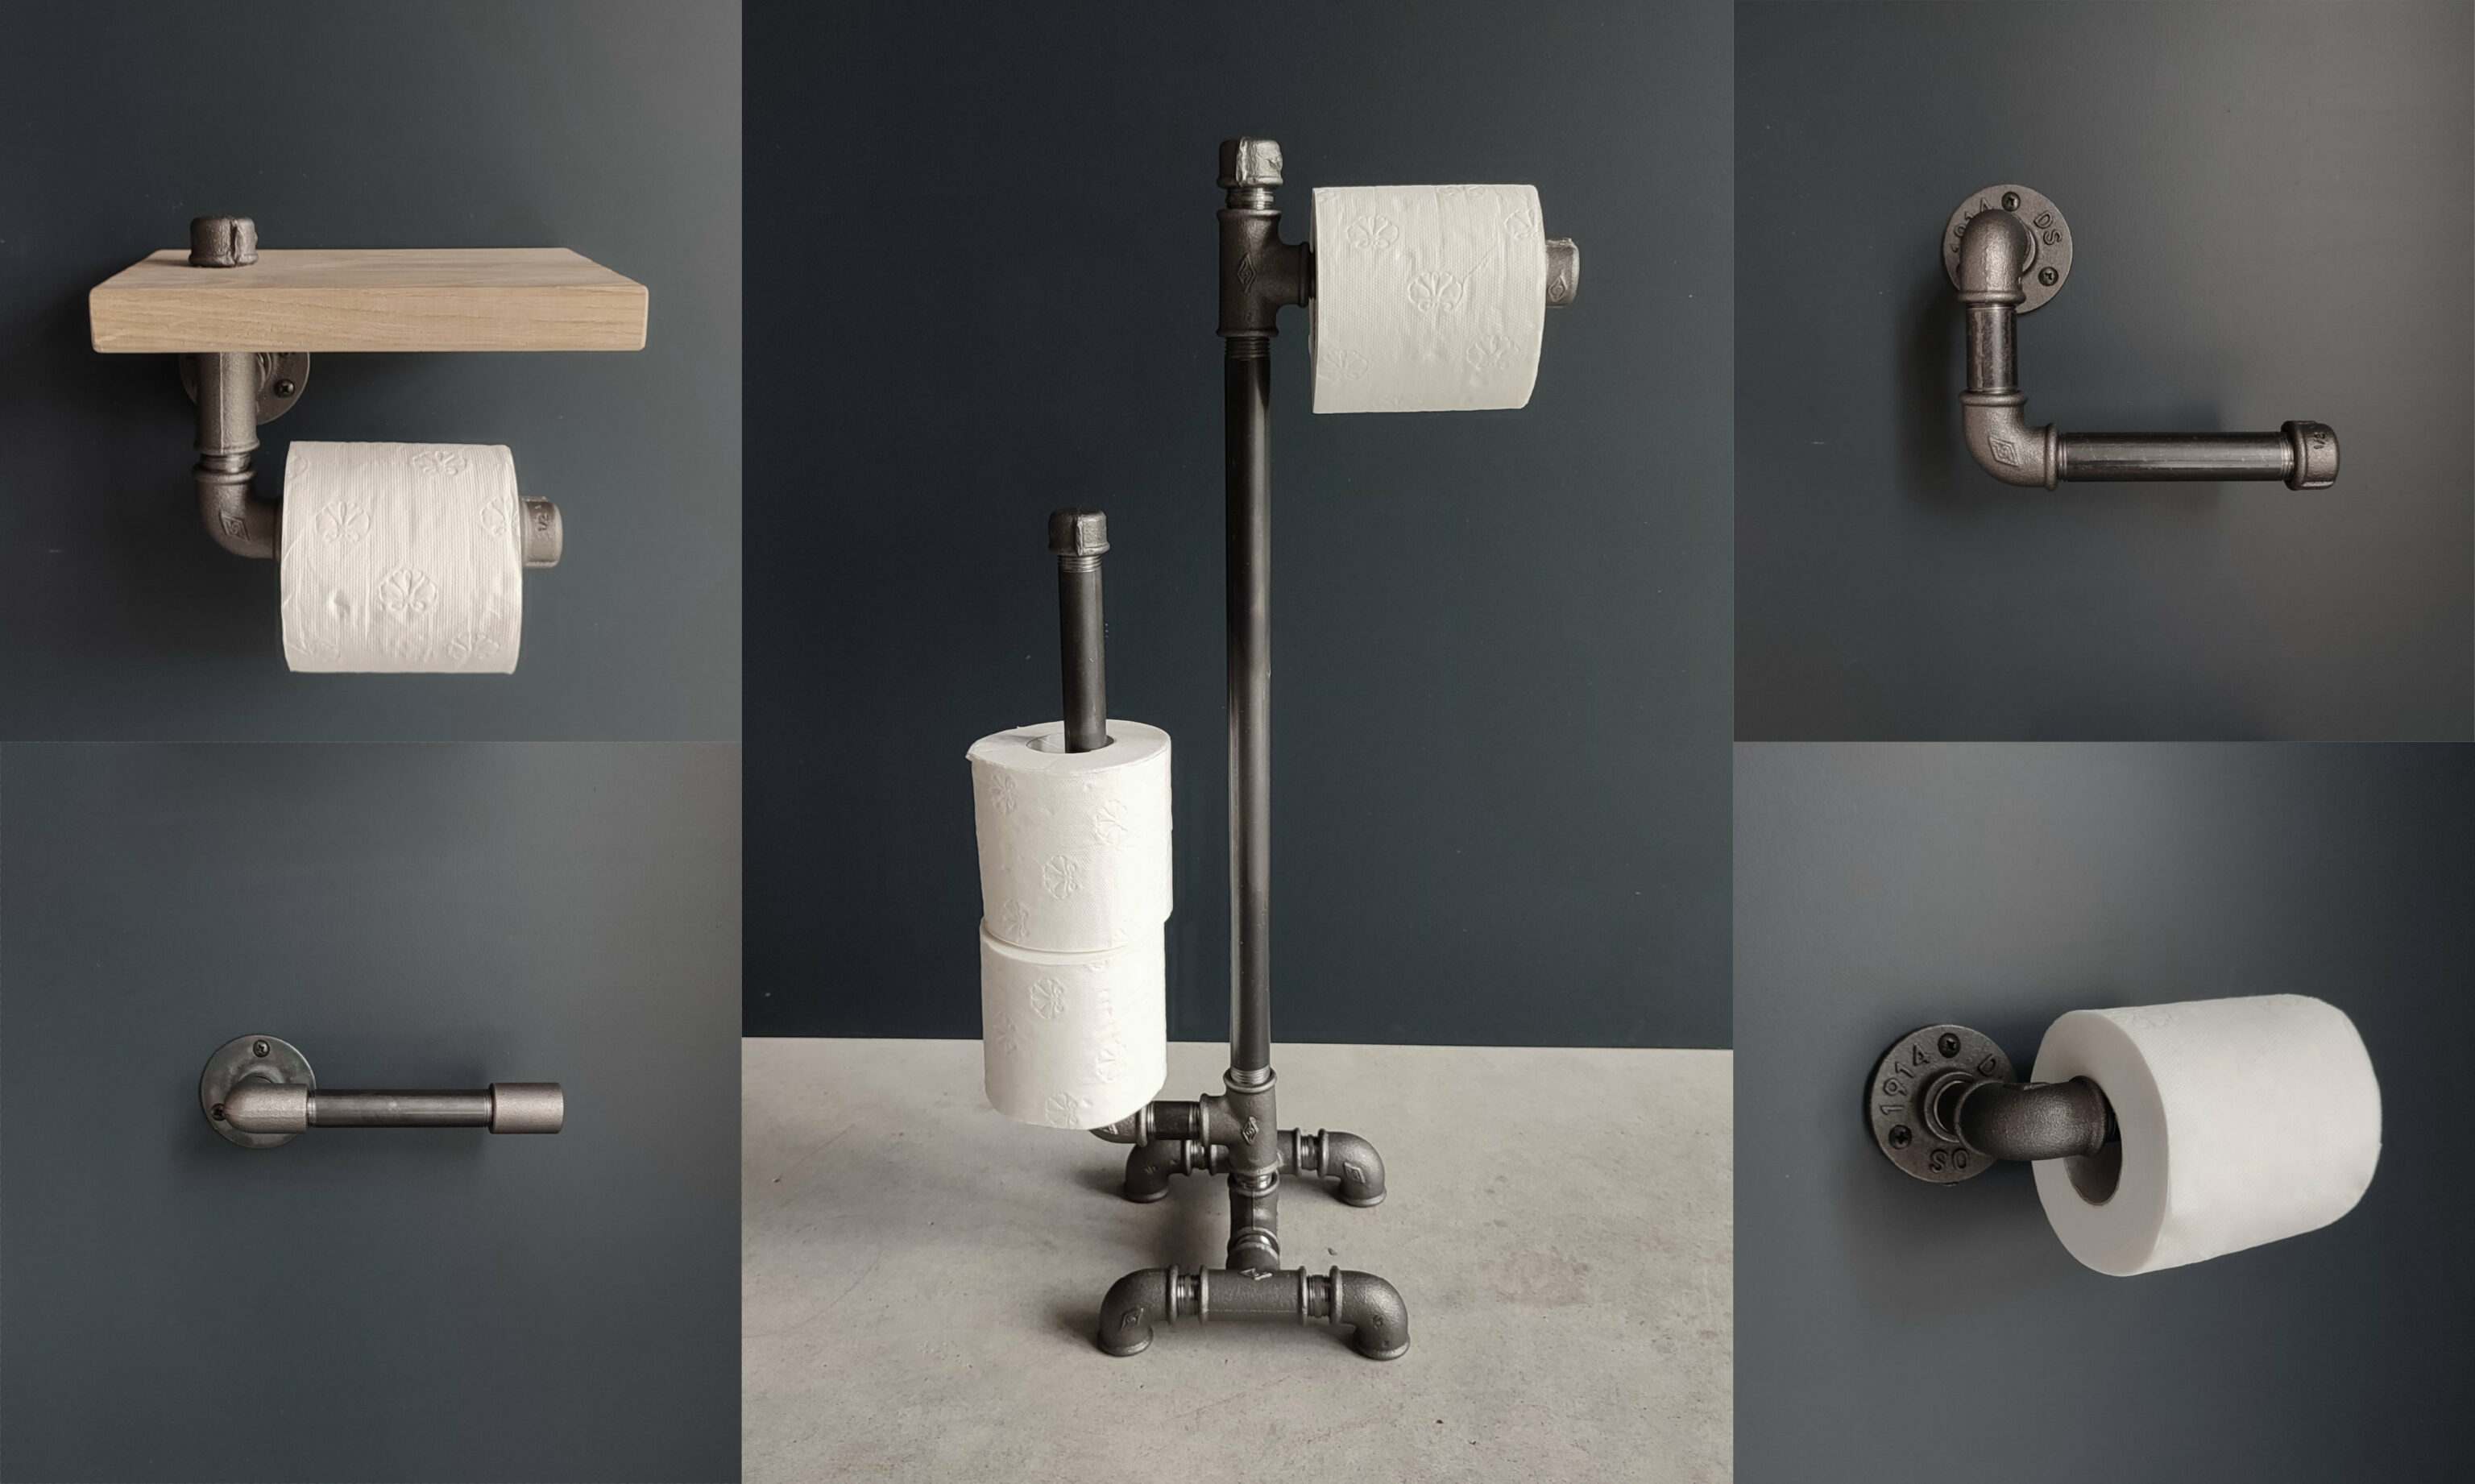 5 industrial style toilet paper holders to make for your little plumbing decorating corner - Deco Blog - MC Fact